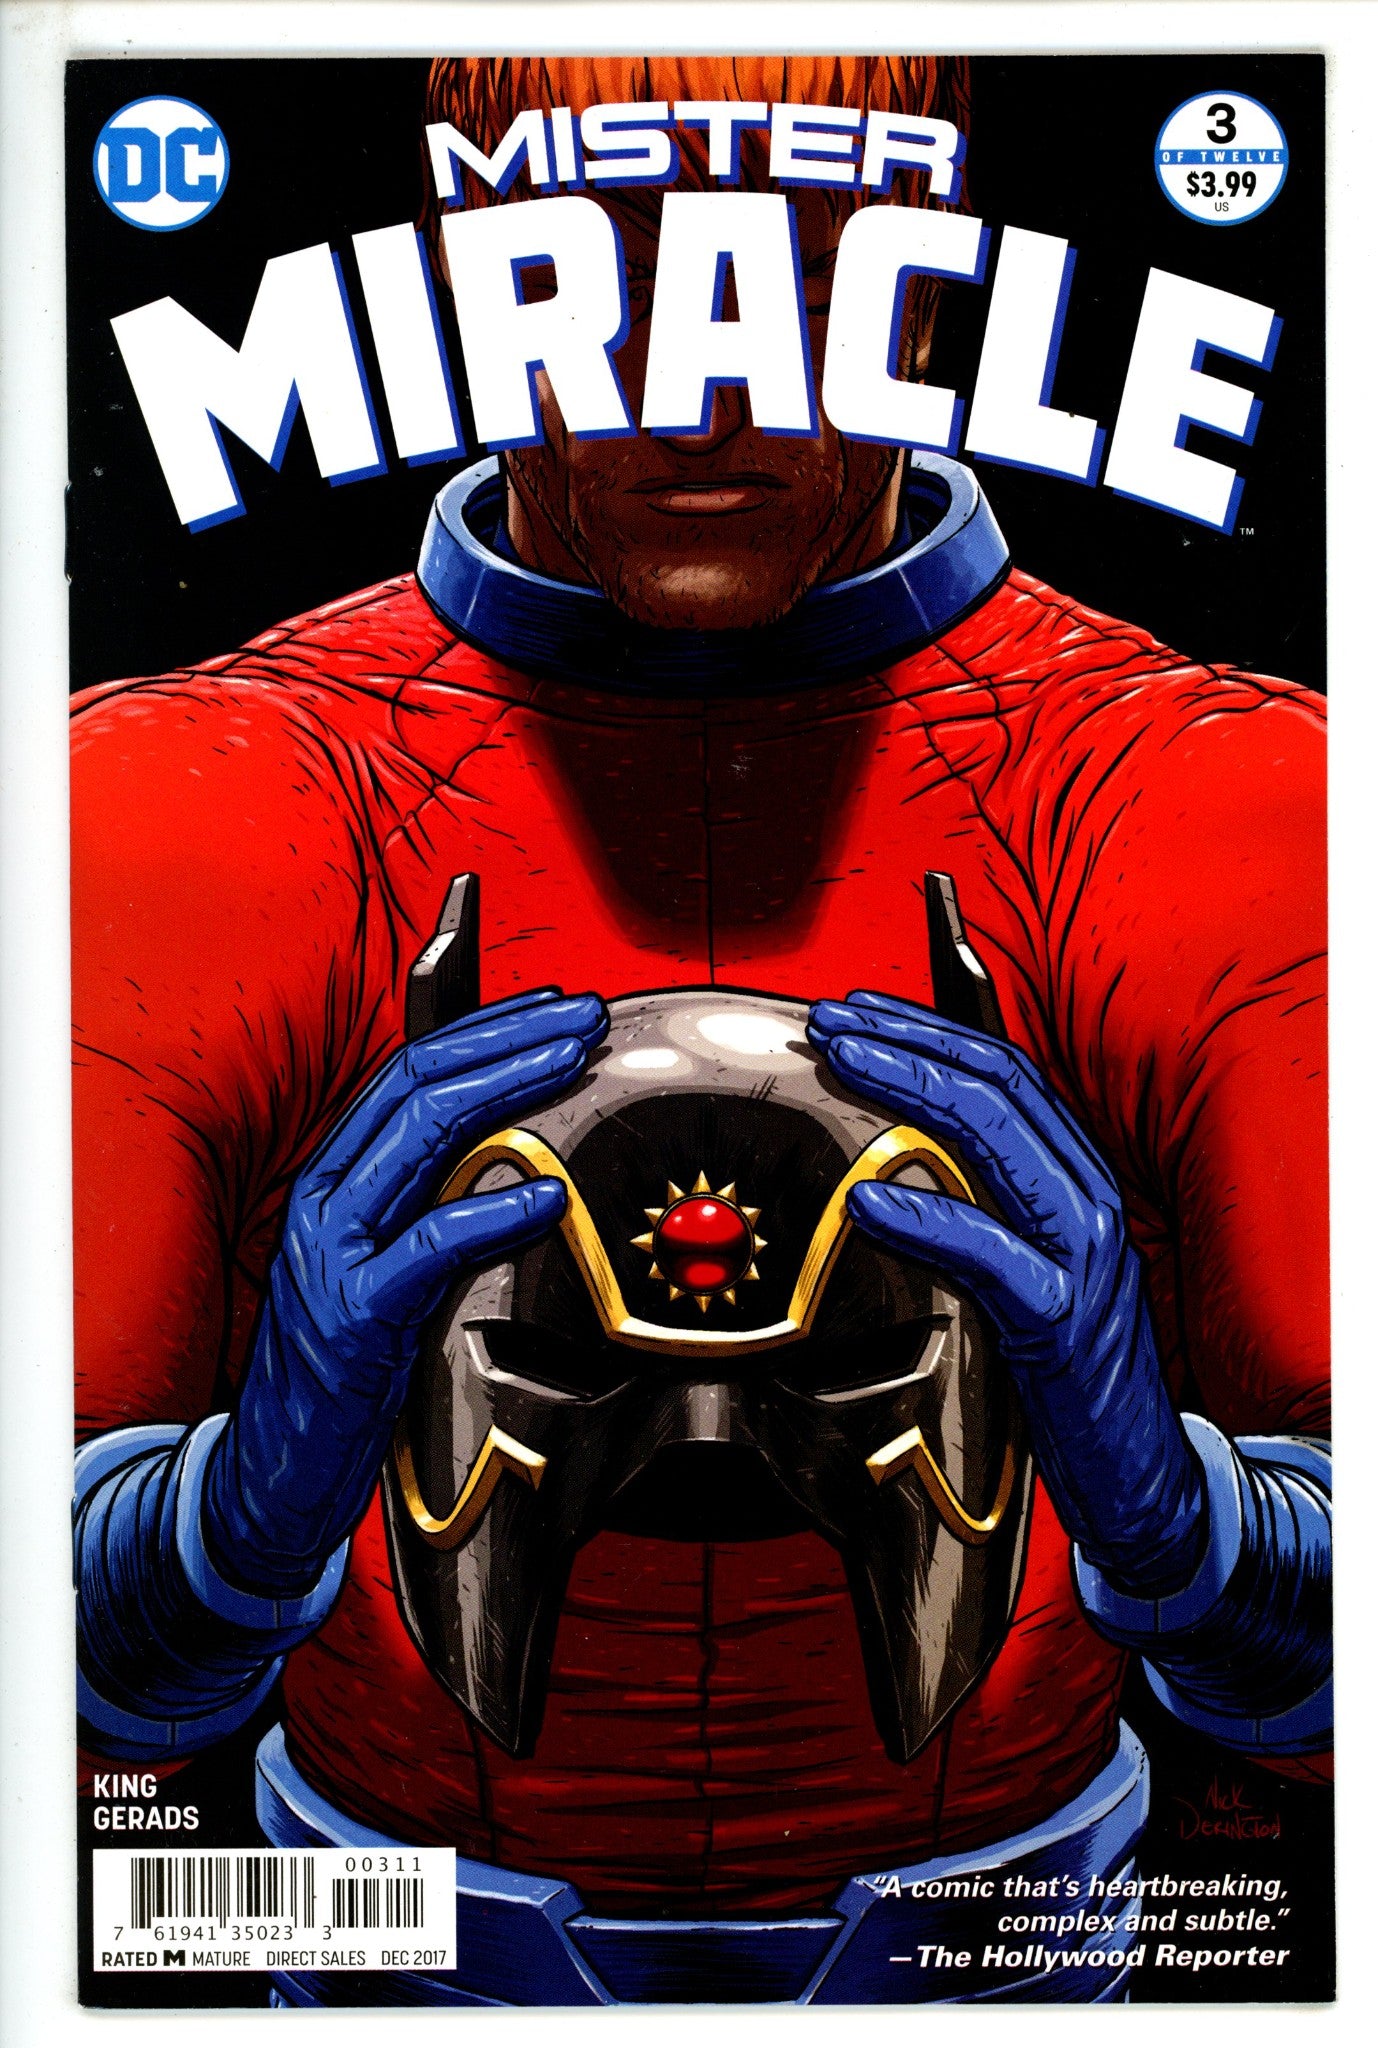 Mister Miracle Vol 4 3 High Grade (2017) 